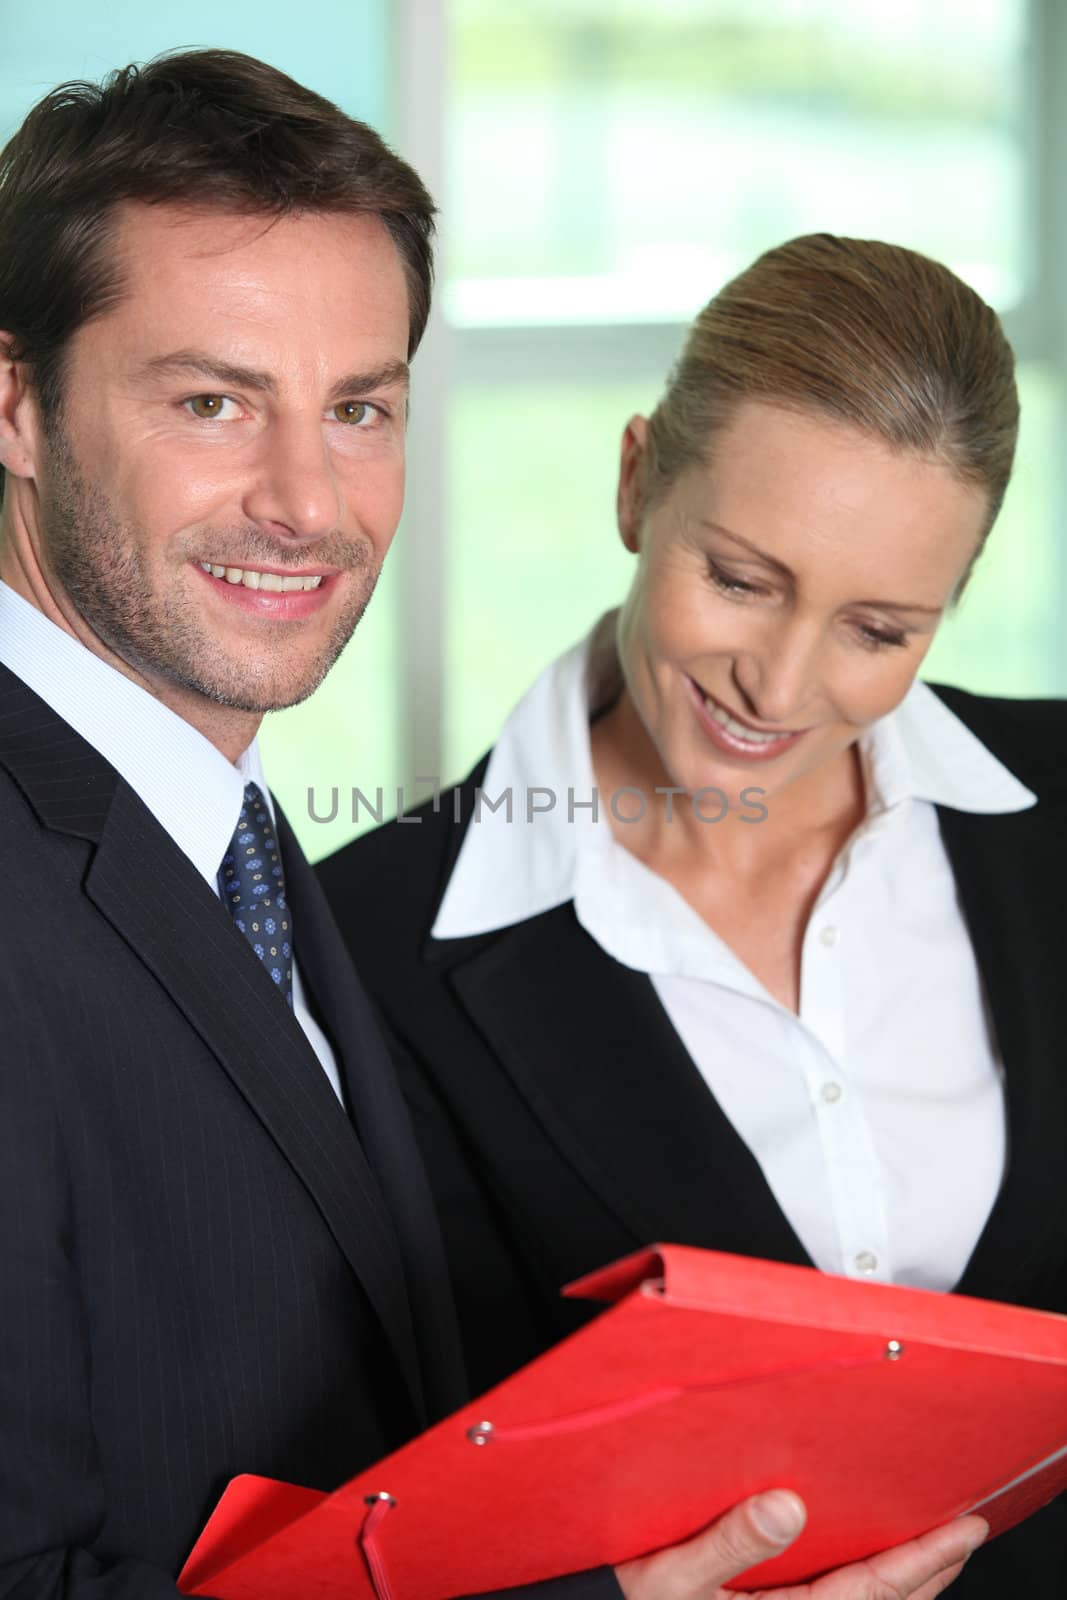 Businesswoman looking at businessman's notes